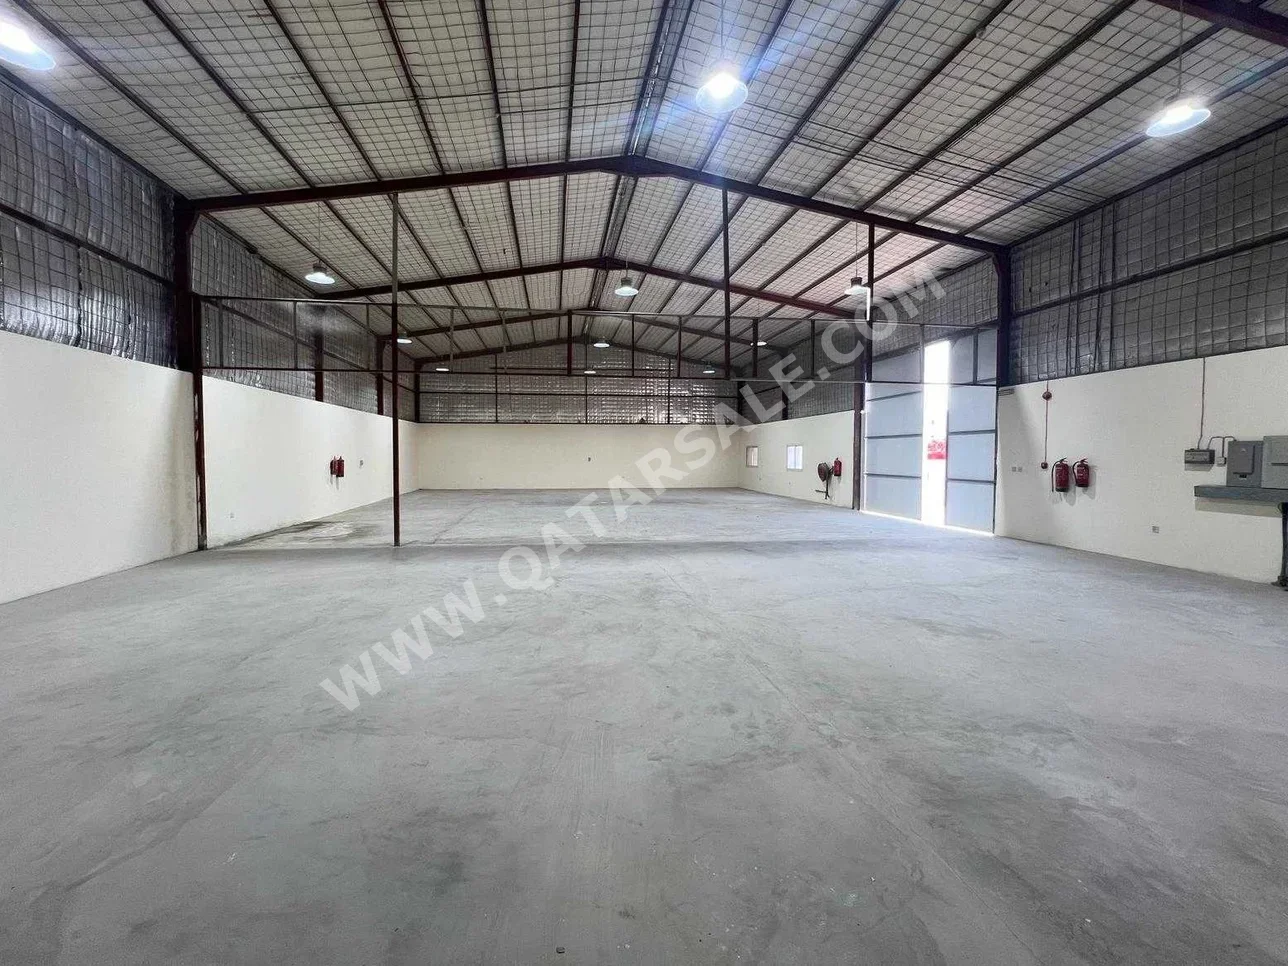 Warehouses & Stores Doha  Industrial Area Area Size: 500 Square Meter